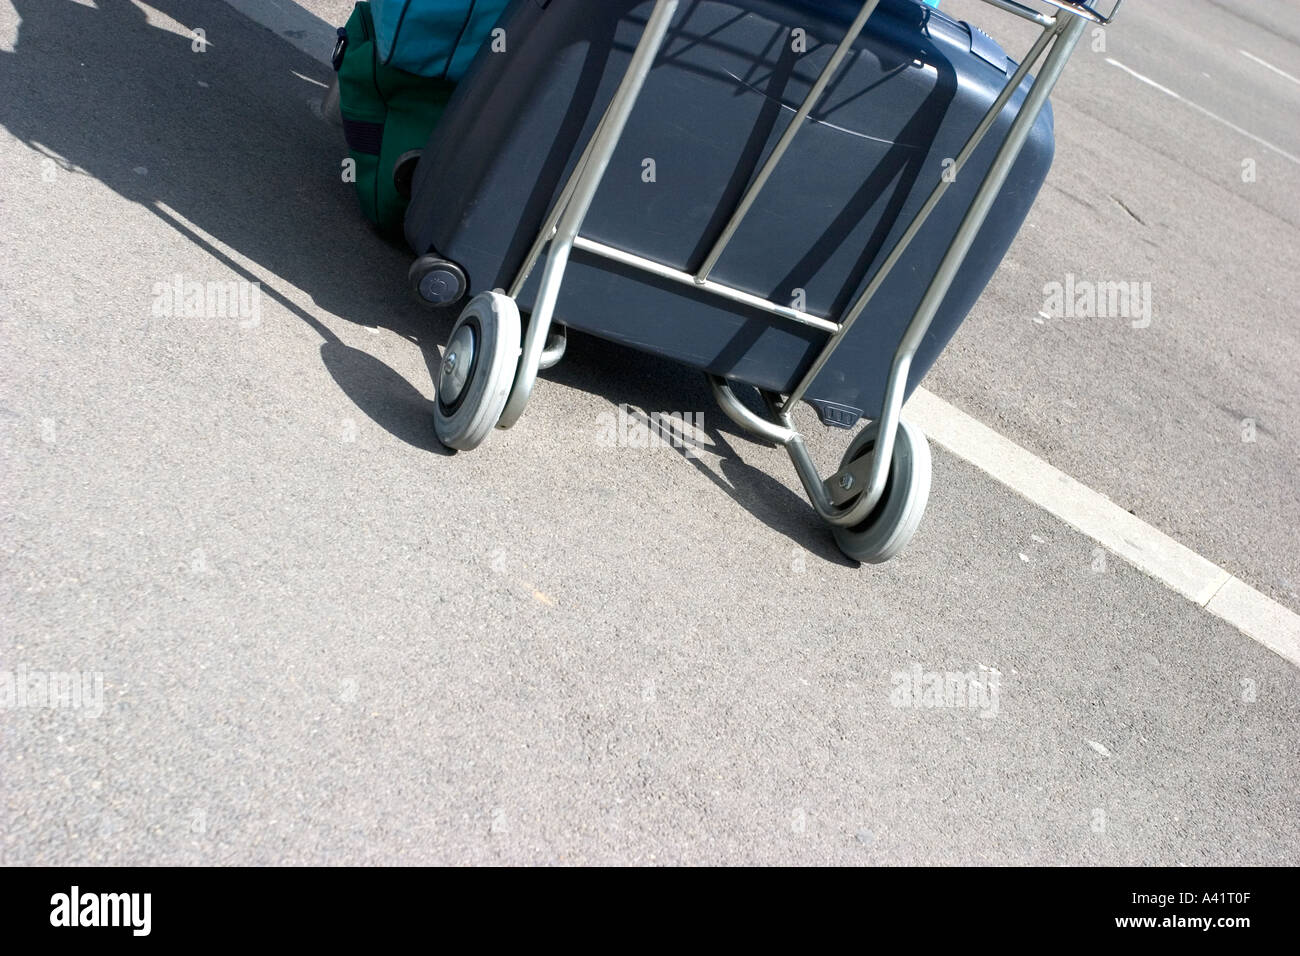 detail of luggage wheels in outdoor airport Stock Photo